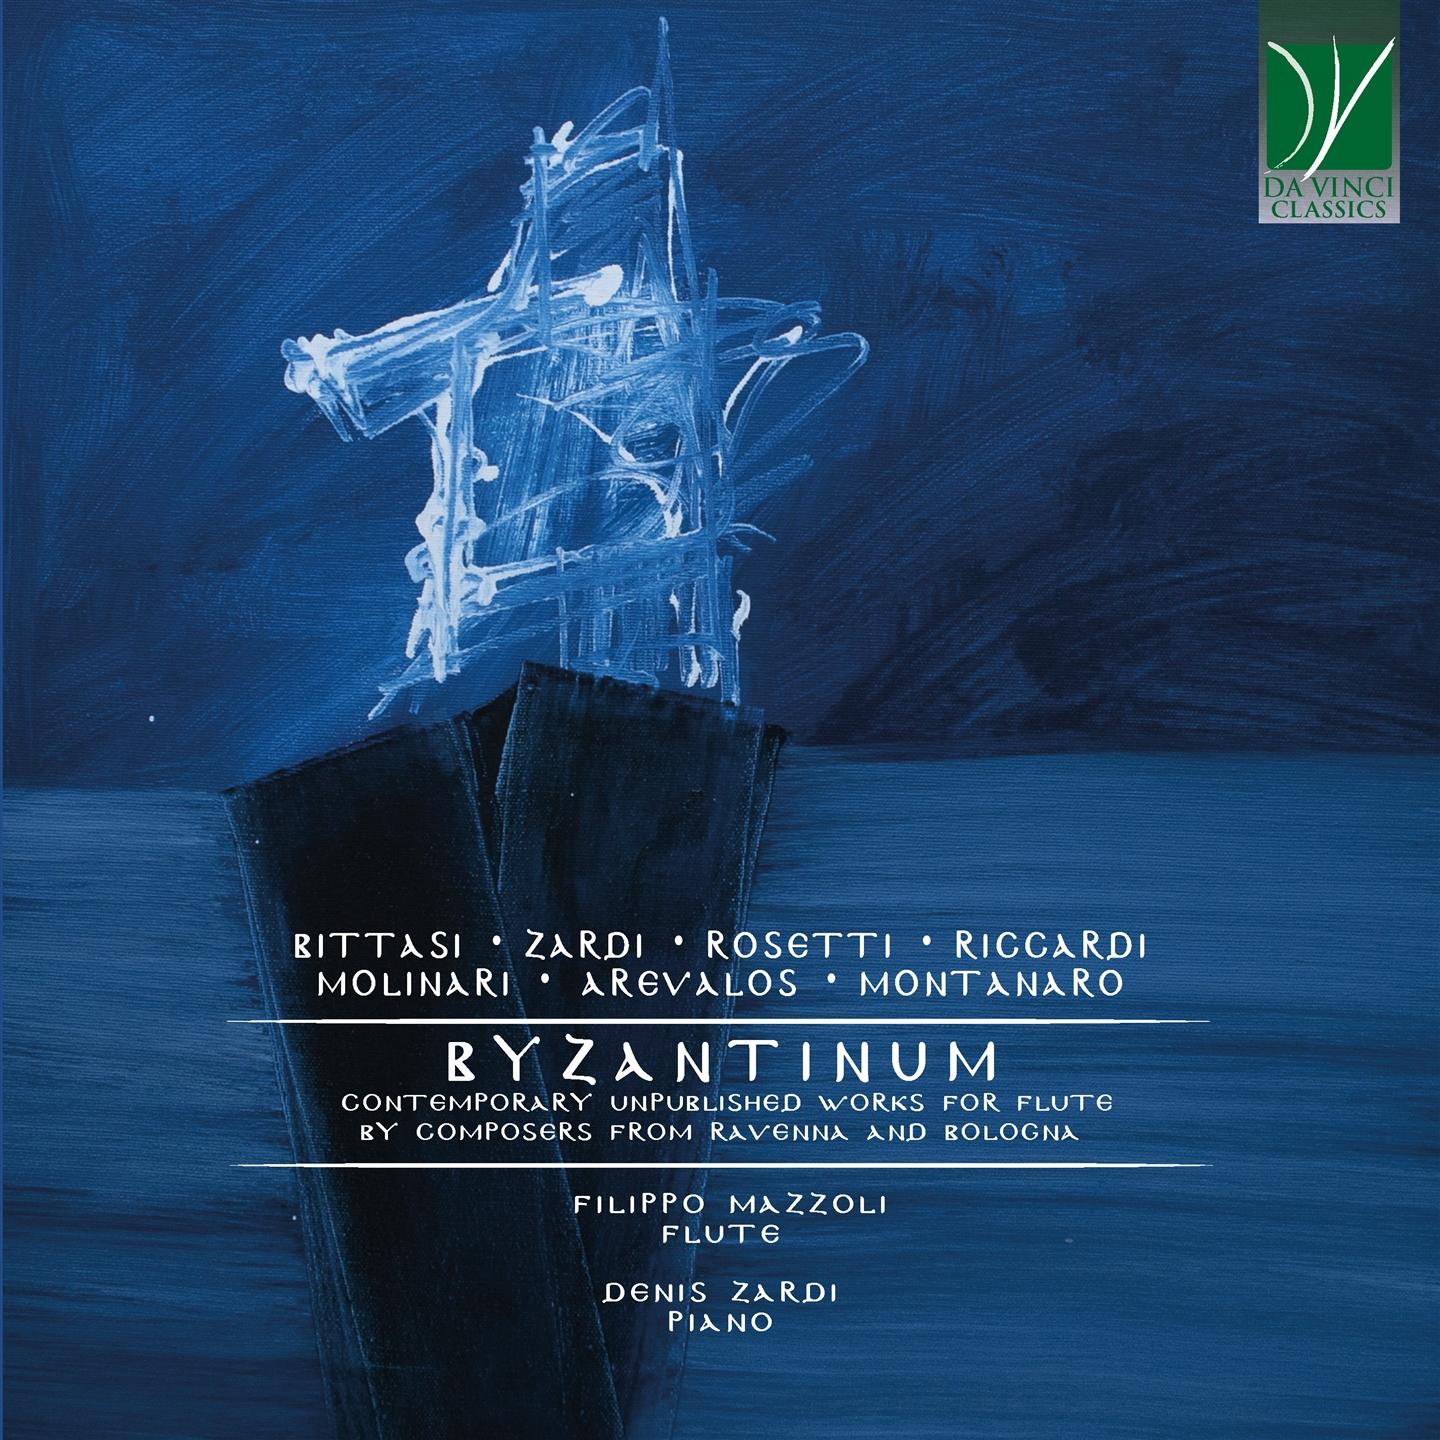 BYZANTINUM: CONTEMPORARY UNPUBLISHED WORKS FOR FLUTE BY COMPOSERS FROM RAVENNA